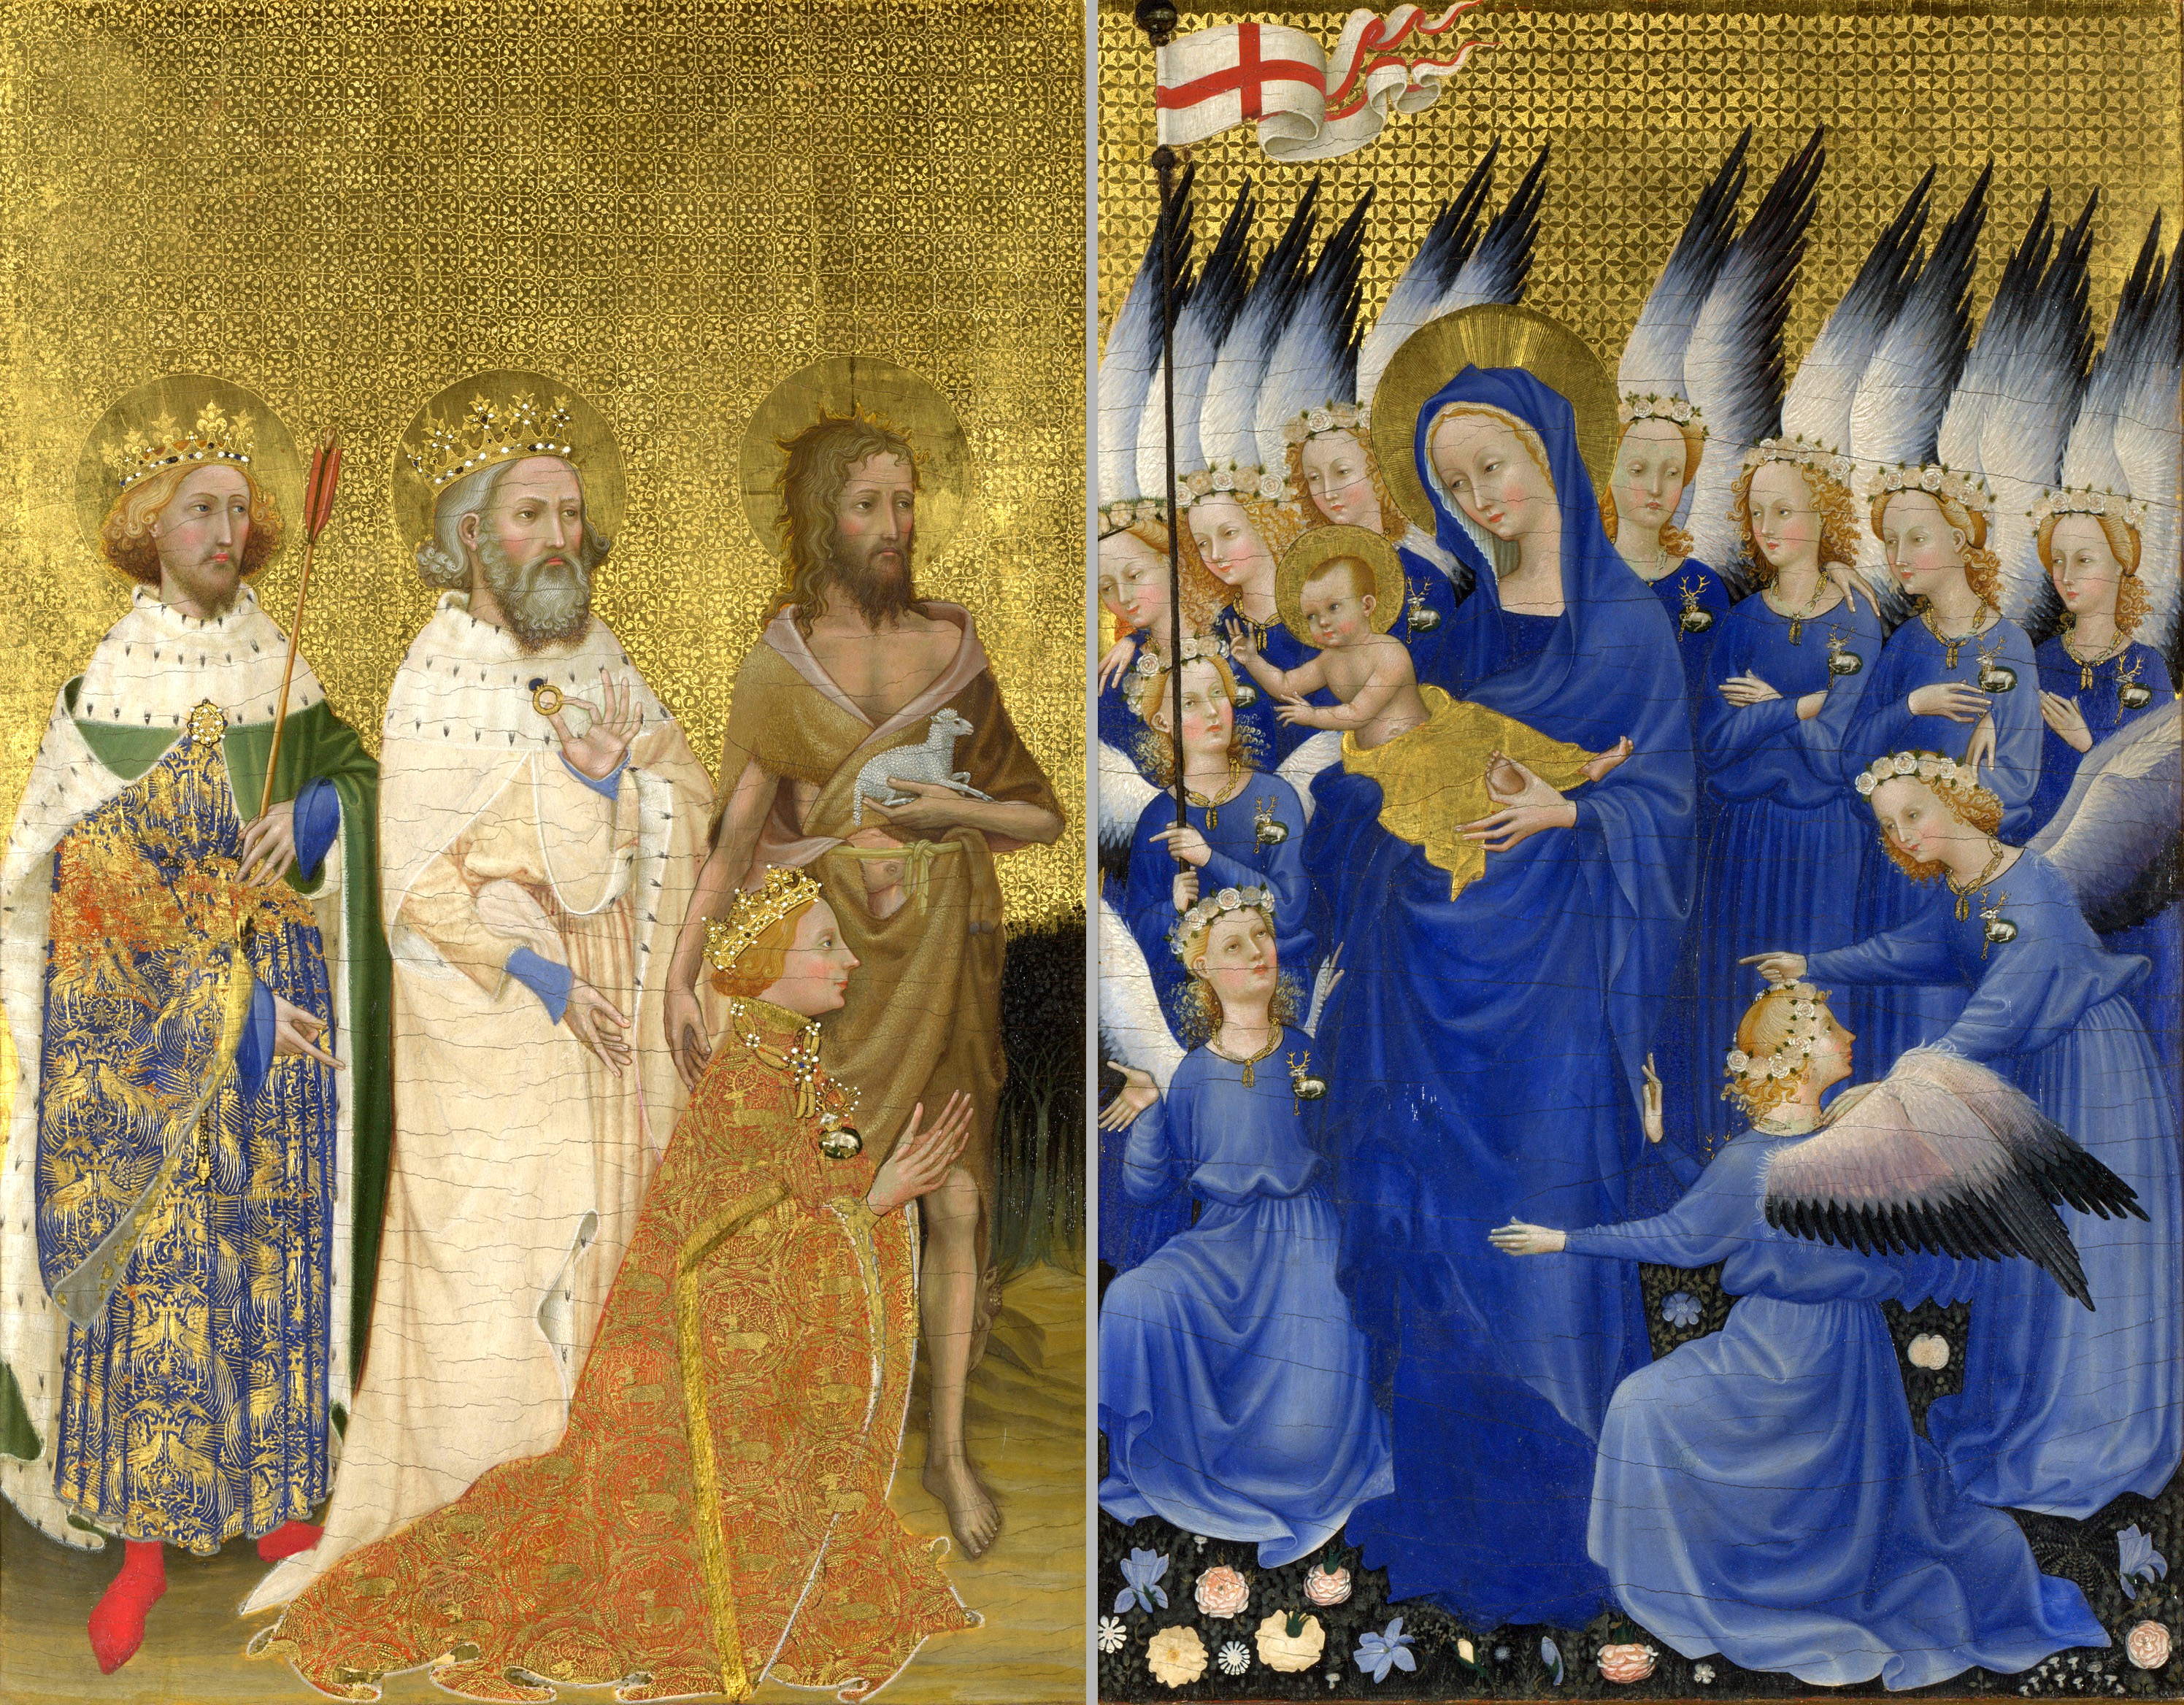 The Wilton Diptych of 1396